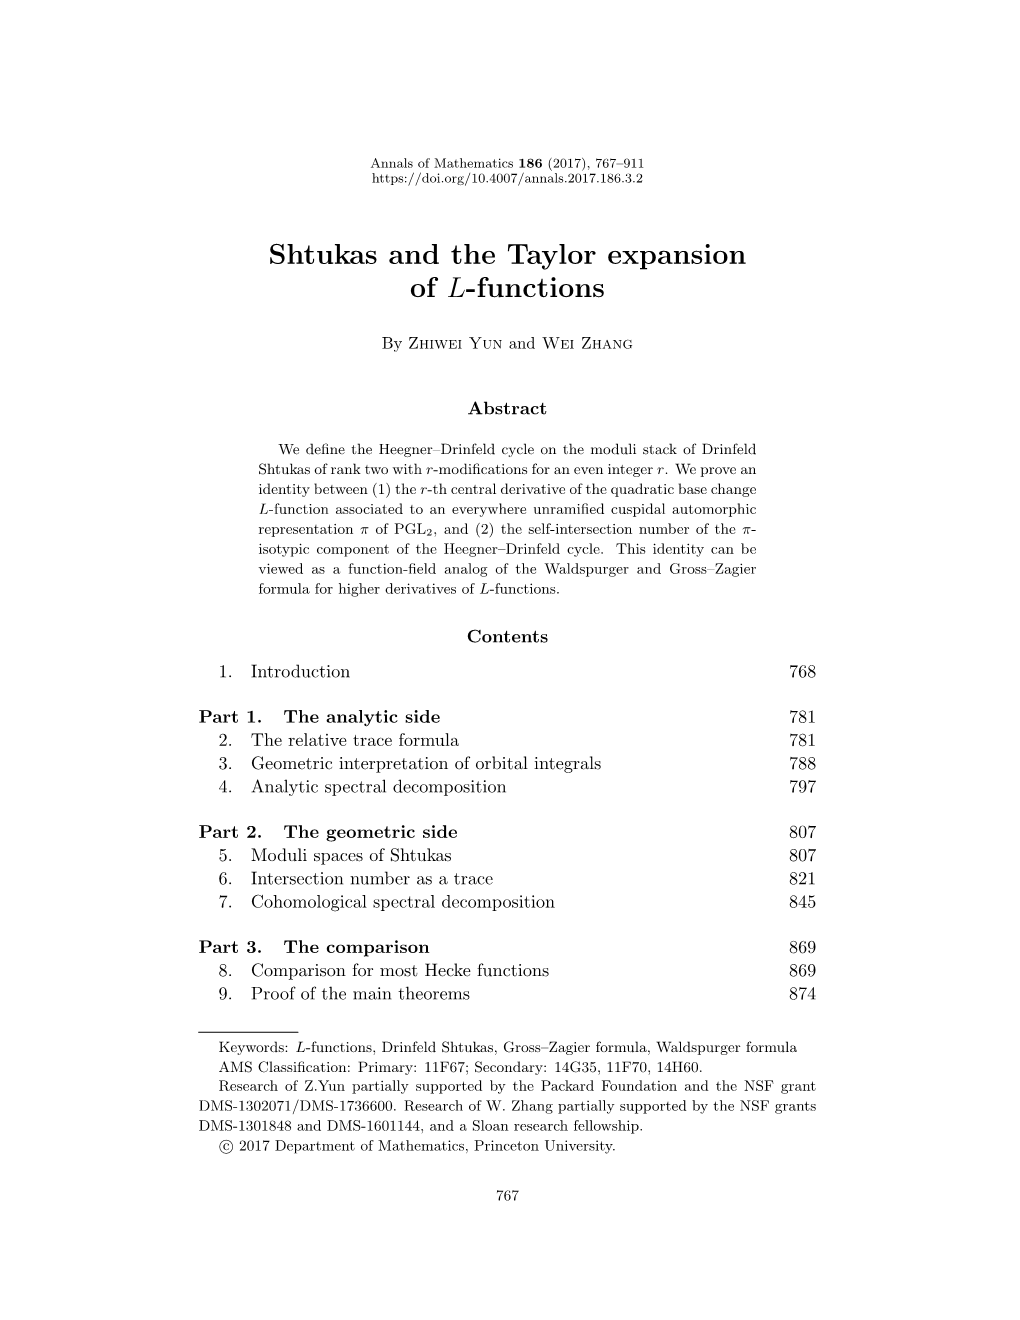 Shtukas and the Taylor Expansion of L-Functions